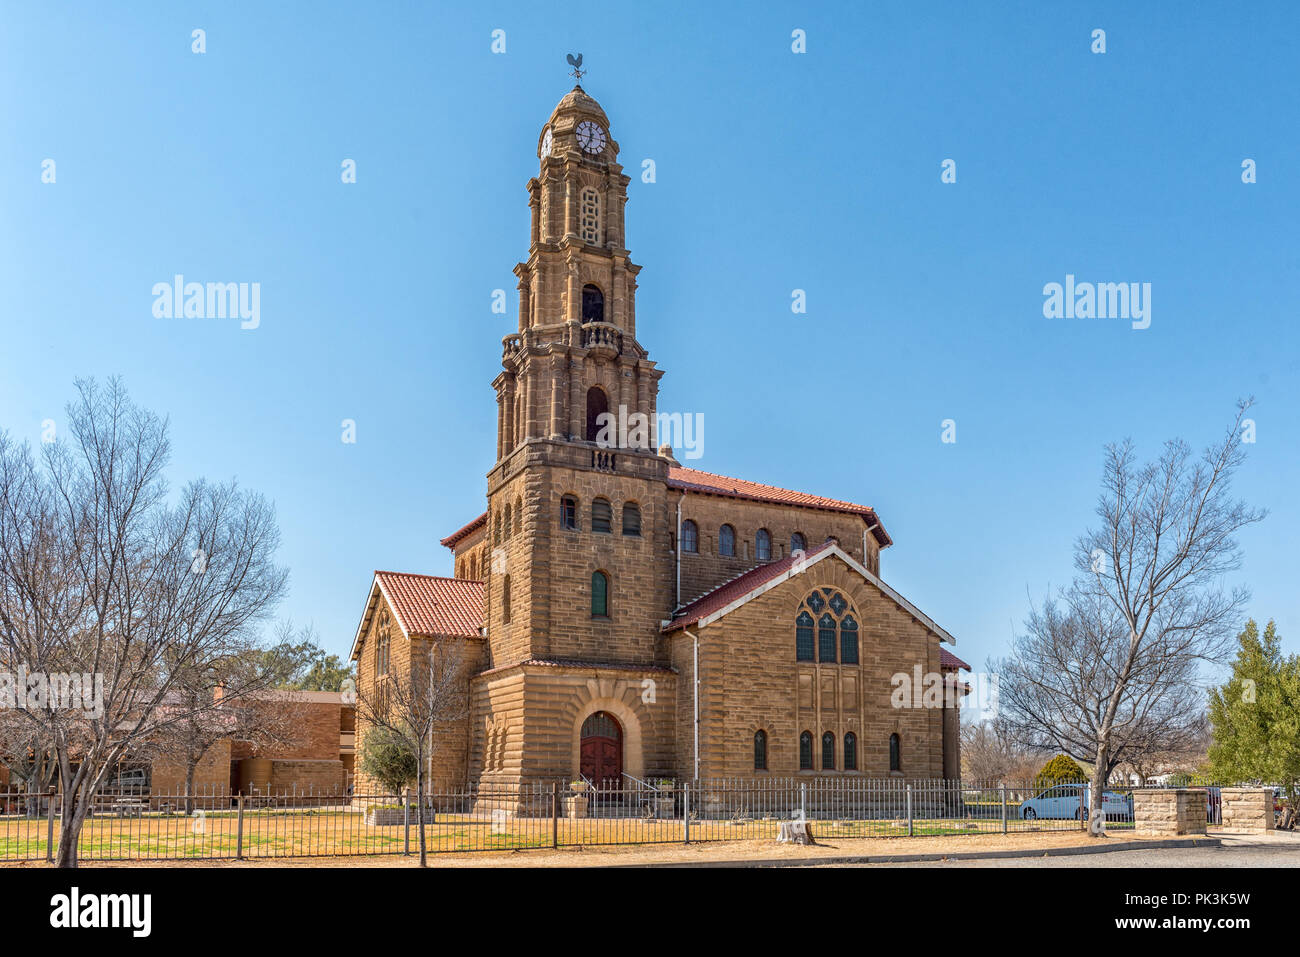 KROONSTAD. SOUTH AFRICA, JULY 30, 2018: The Dutch Reformed Mother Church Kroonstad-North, in Kroonstad, a town in the Free State Province of South Afr Stock Photo